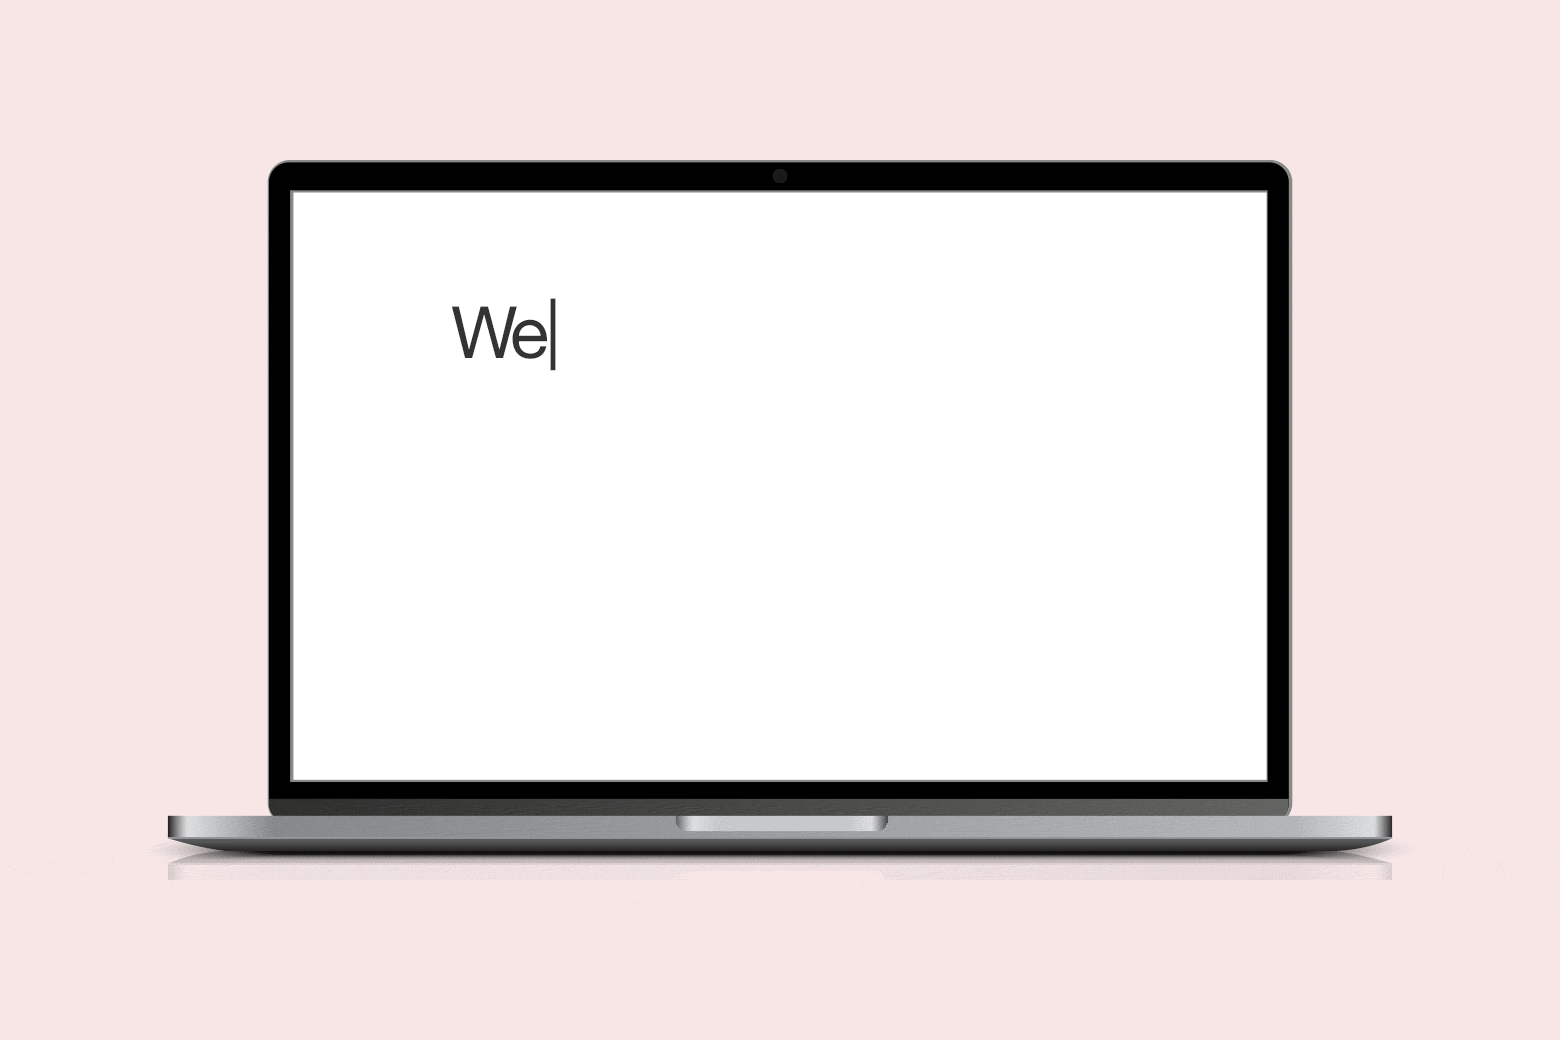 A computer screen with the word "We" on it.